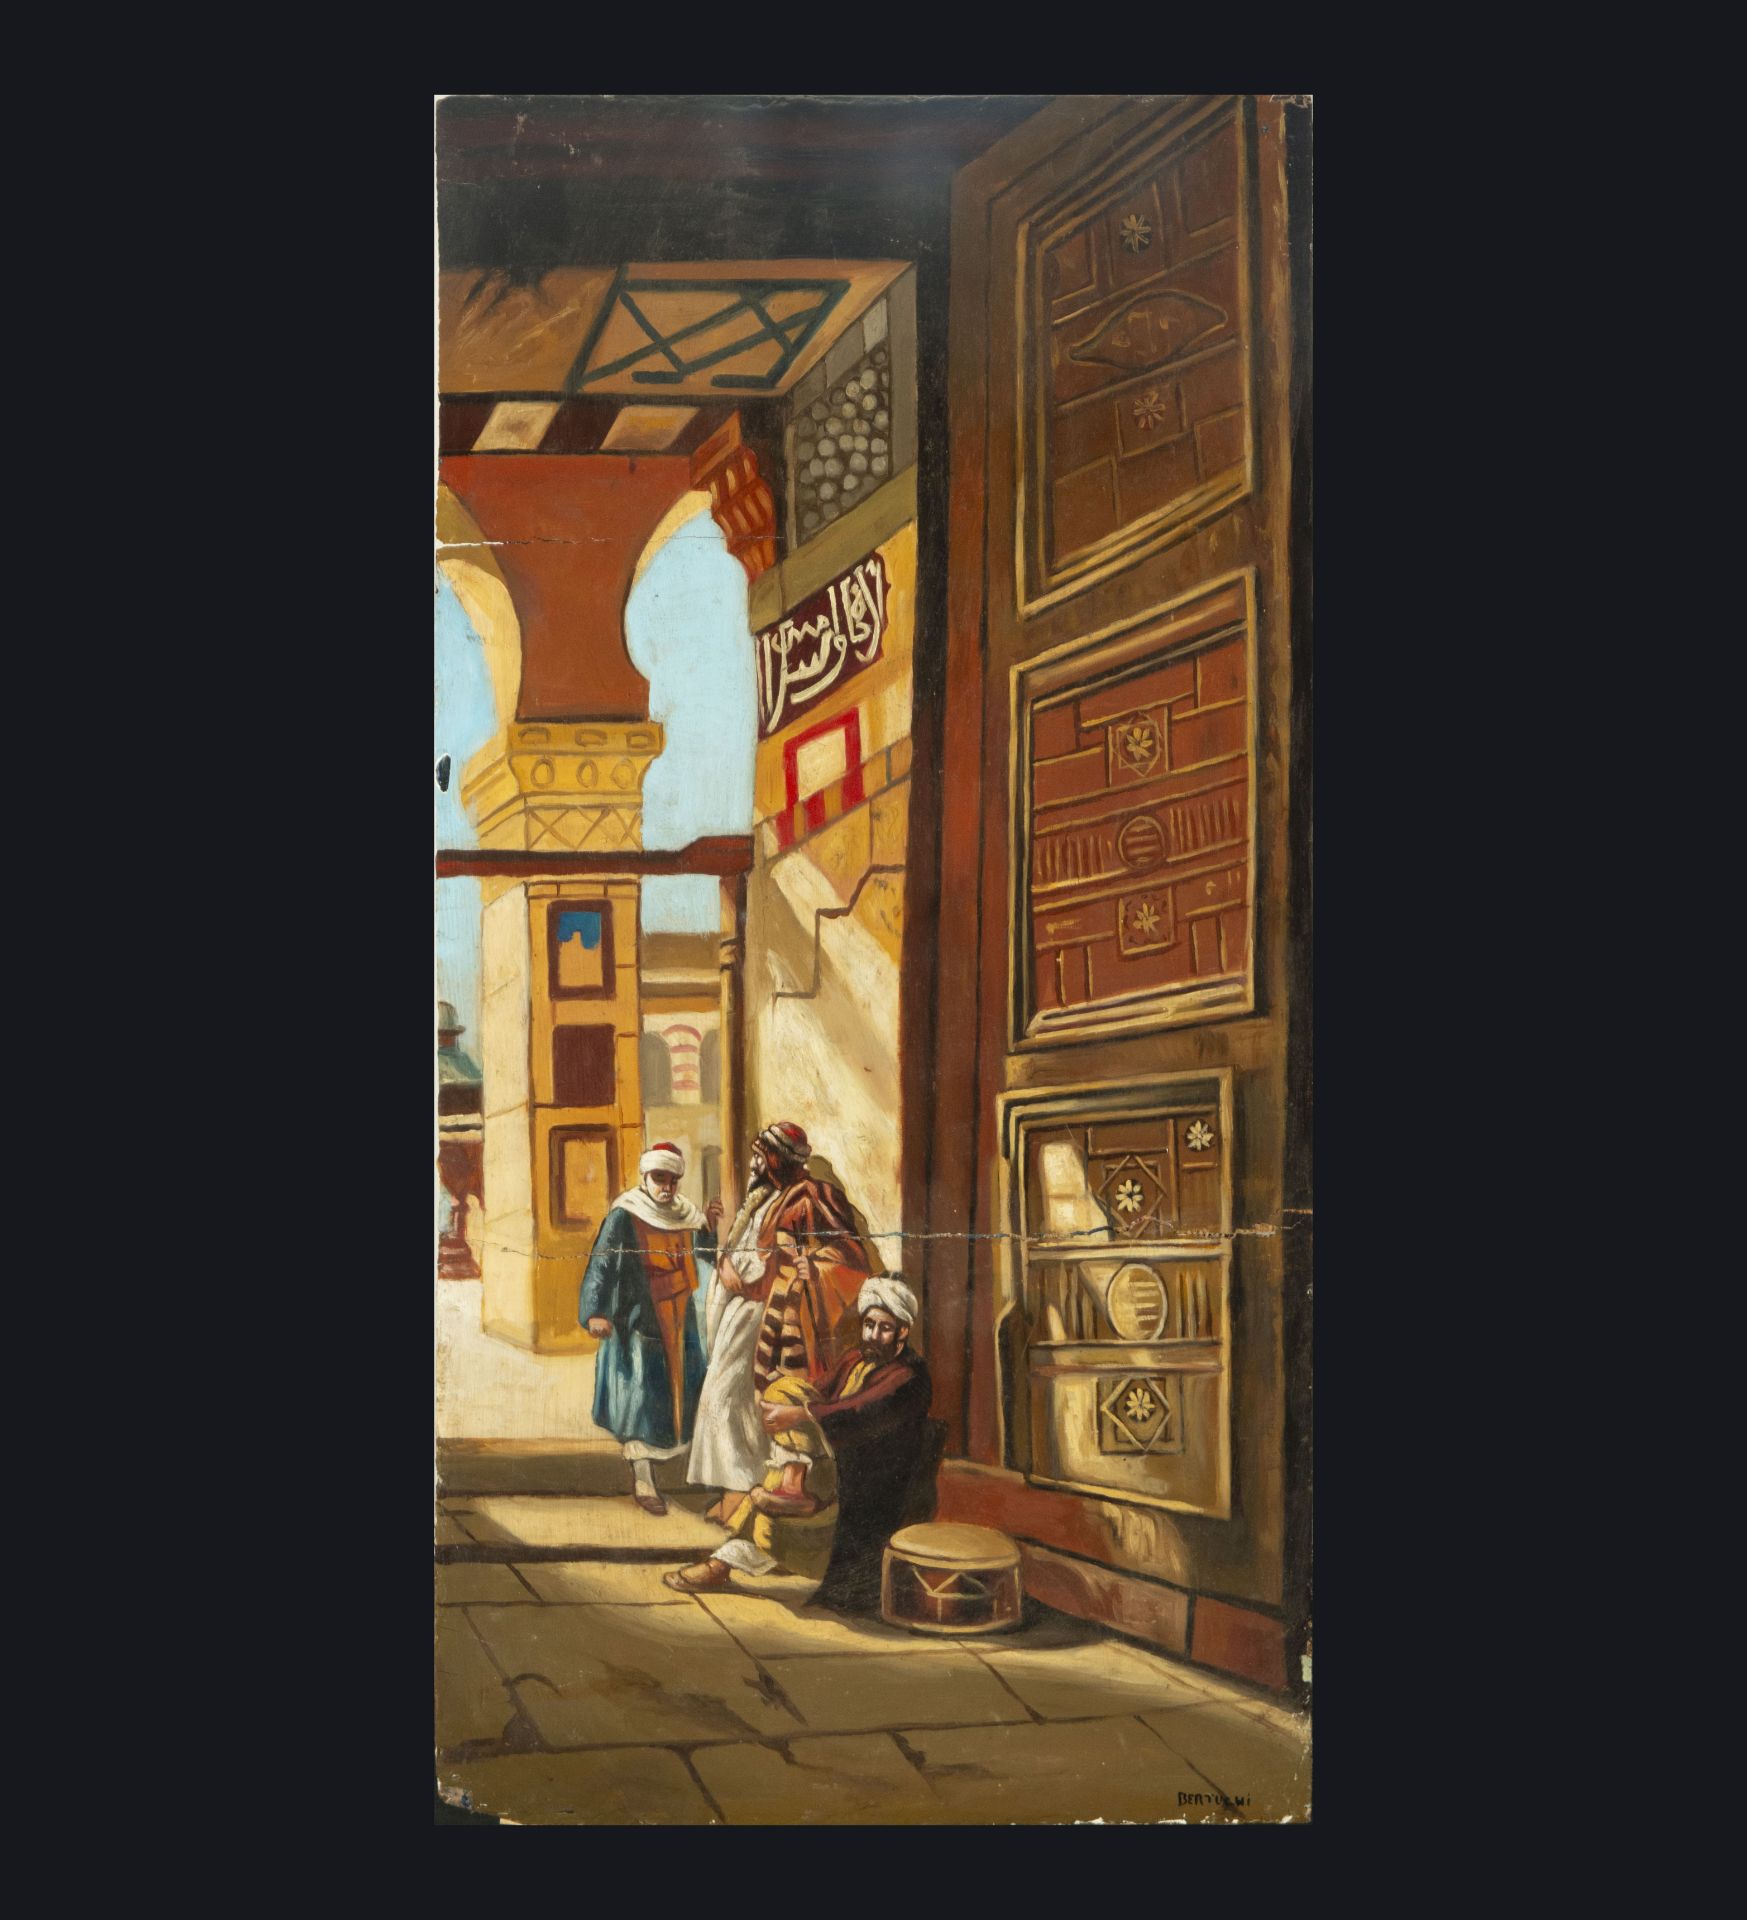 Pair of Orientalist scenes from the Souk and Interior of the Orientalist Palace, oil on panel, signe - Image 4 of 5